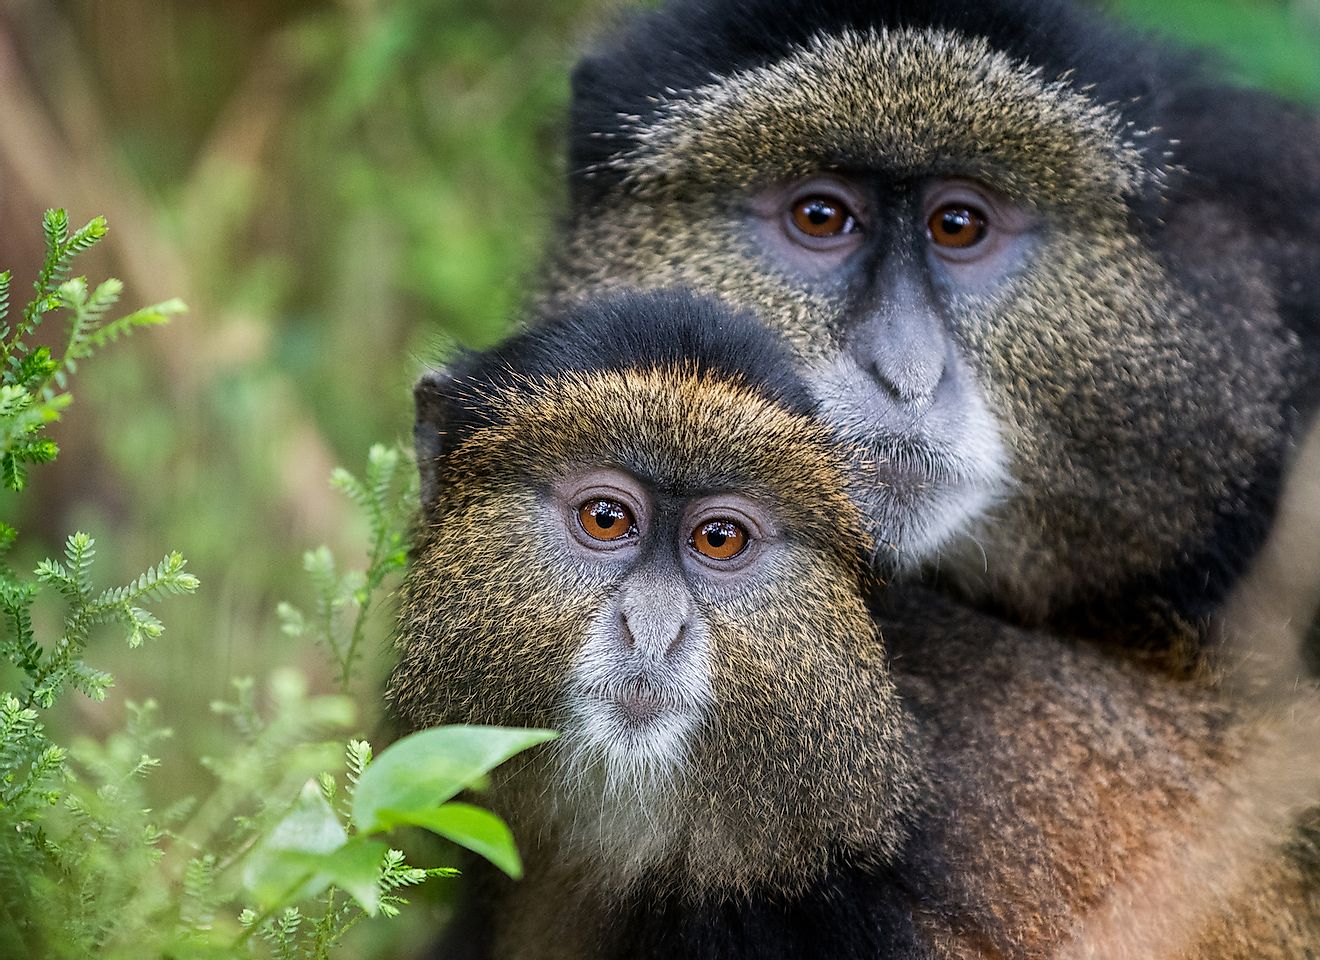 Mother and baby golden monkey in Volcanoes National Park, Rwanda. Image credit: Tony Campbell/Shutterstock.com